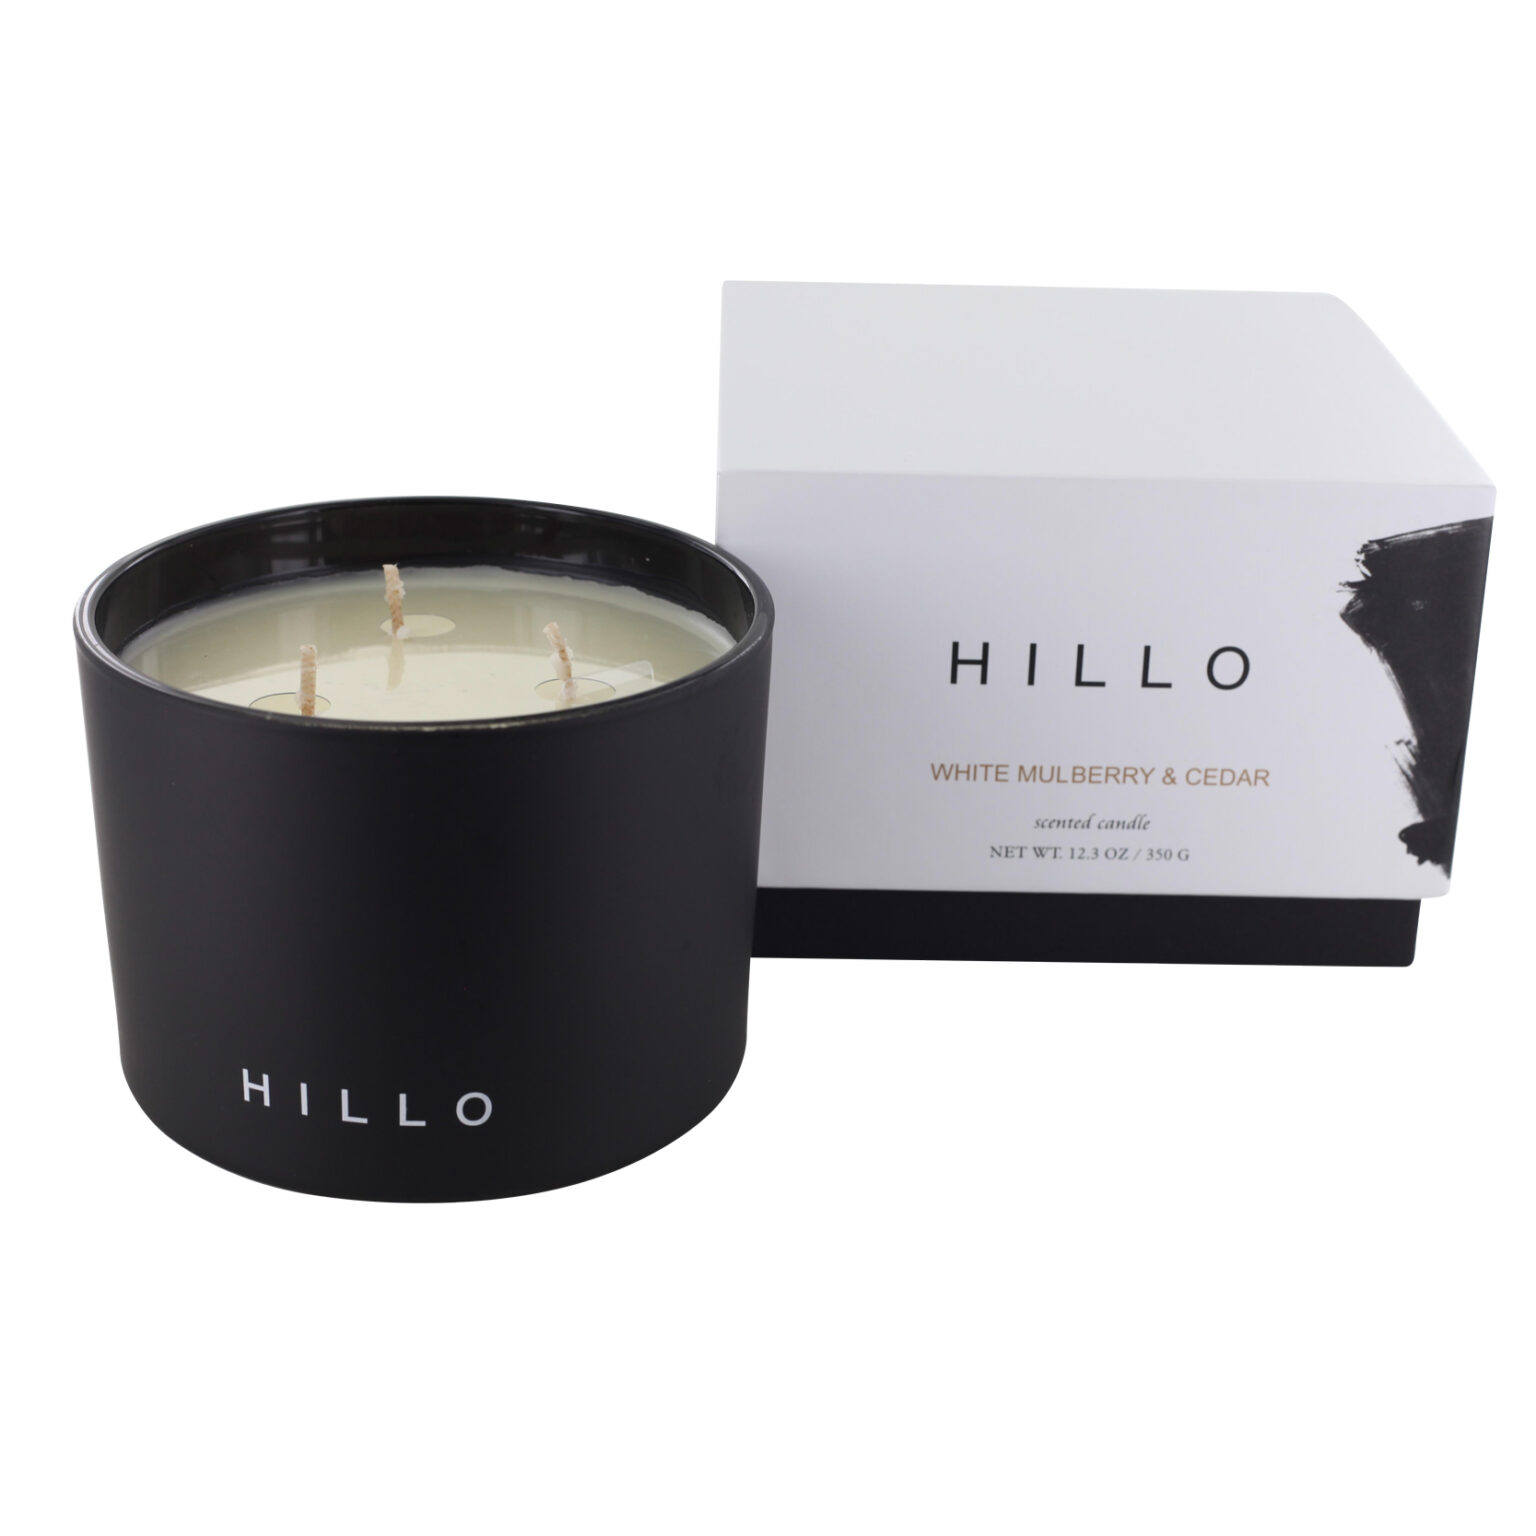 Hillo Scented Soy Candle - Mullberry & Cedar